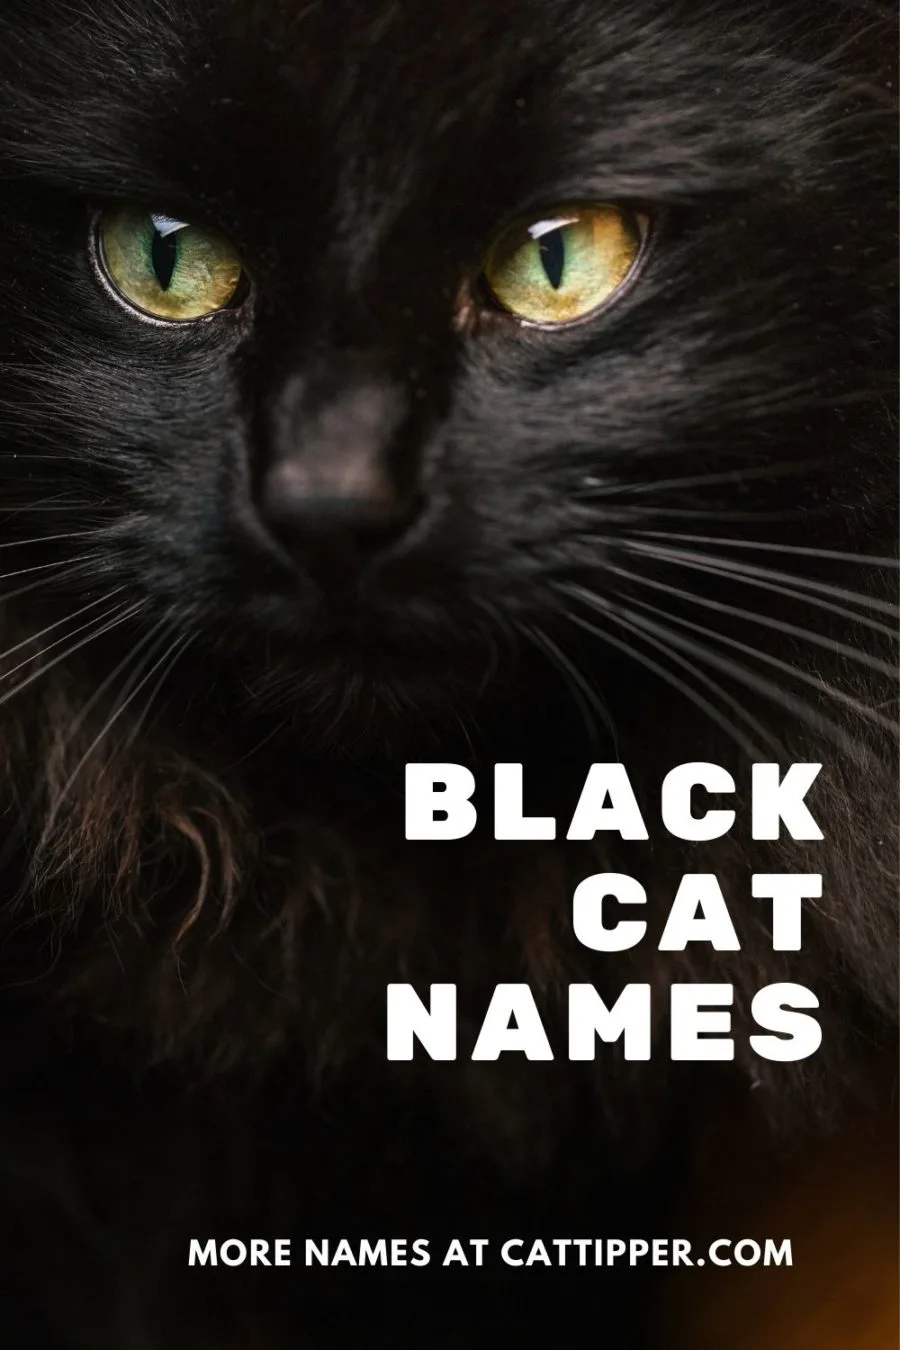 Black cat names and their meanings